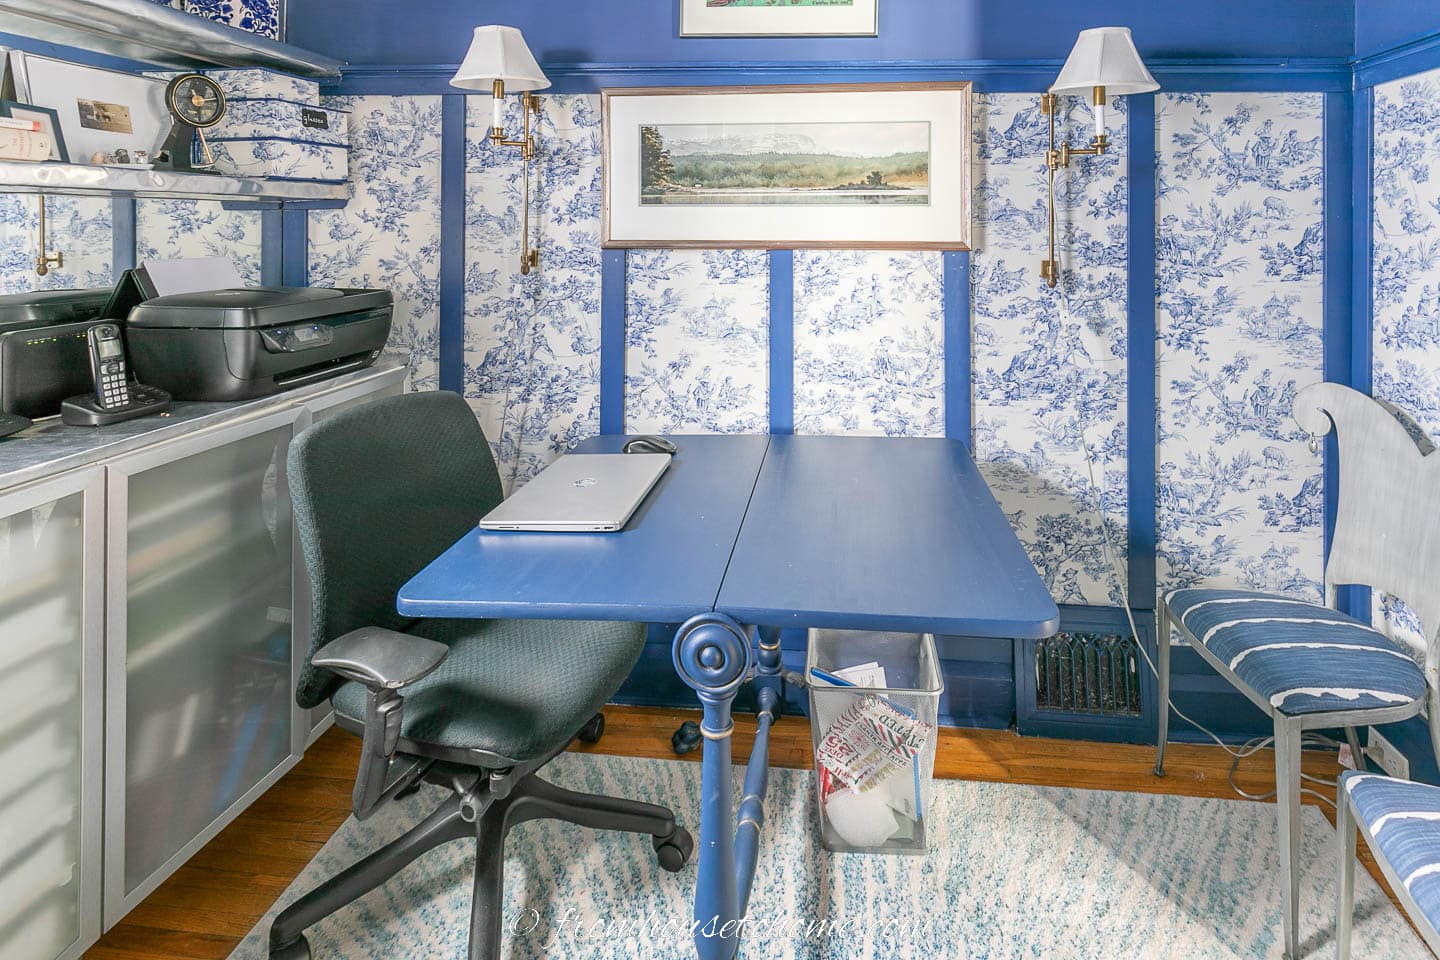 Small home office decorated in blue and white toile with a blue drop leaf table being used as a desk